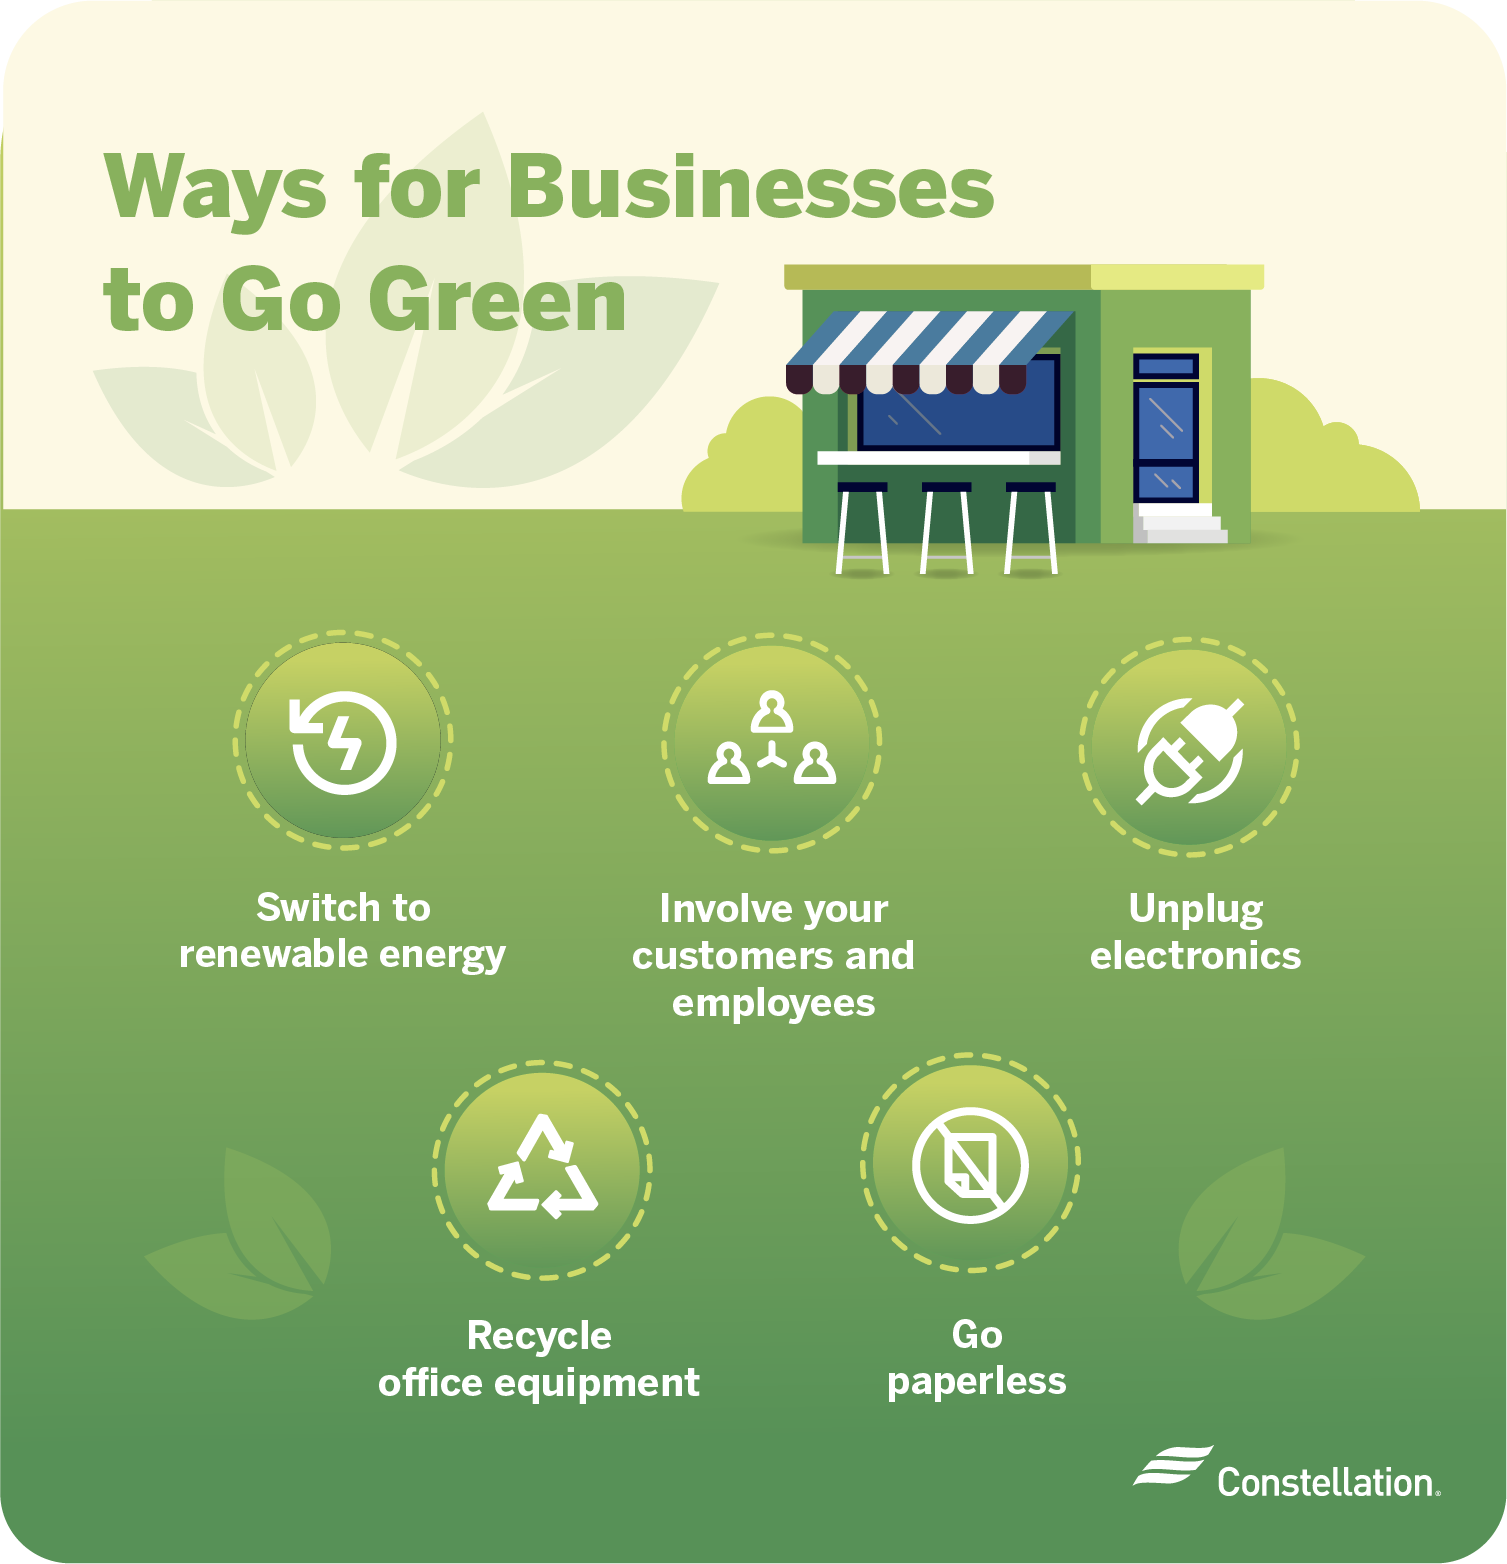 Ways for businesses to go green.